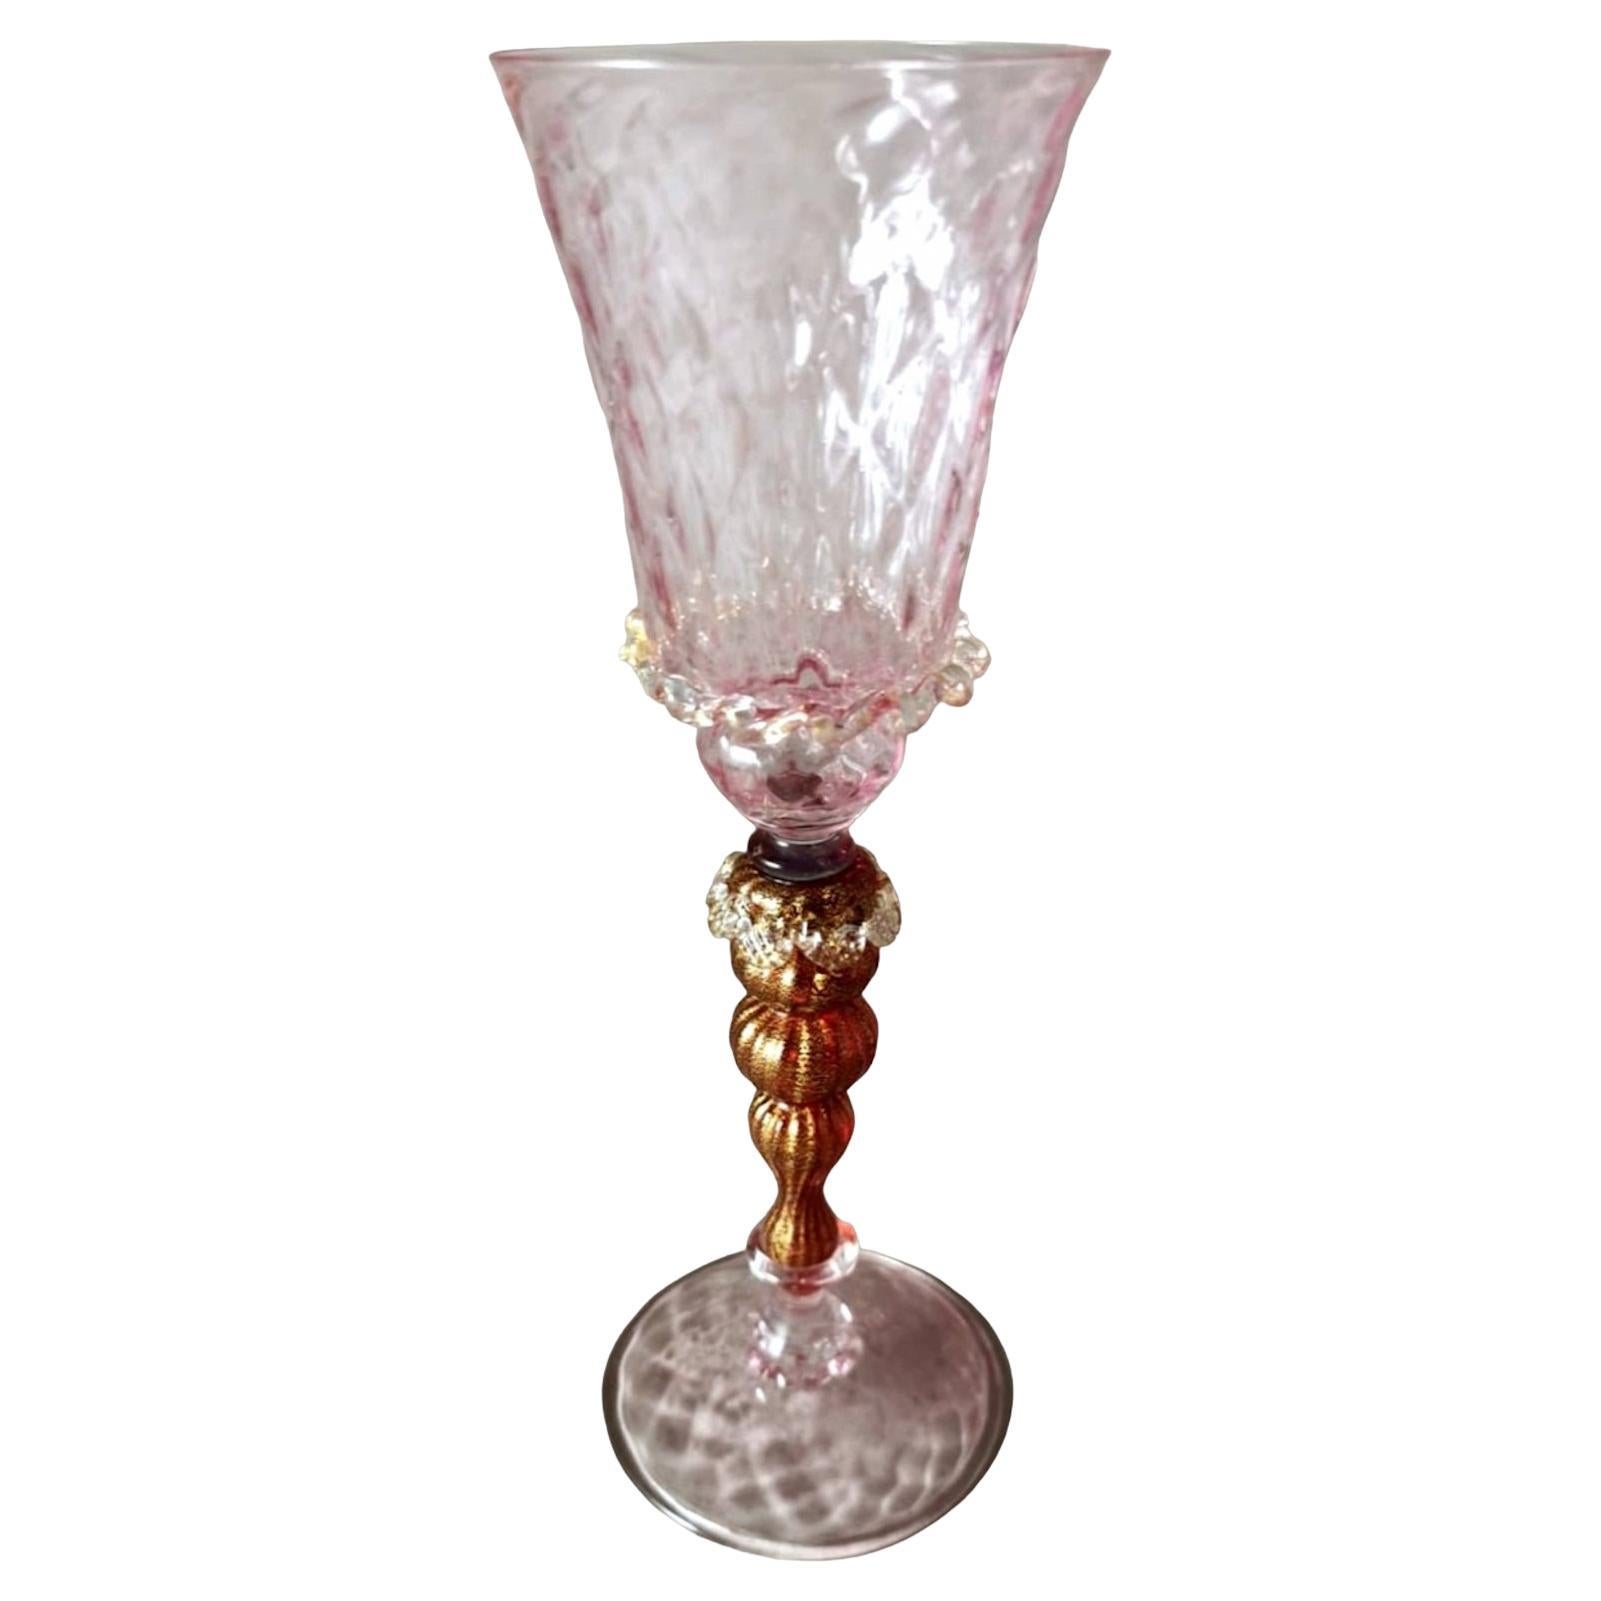 Murano Glass Goblet "Tipetto" Pink Blown Glass With Gold Leaf Decoration For Sale